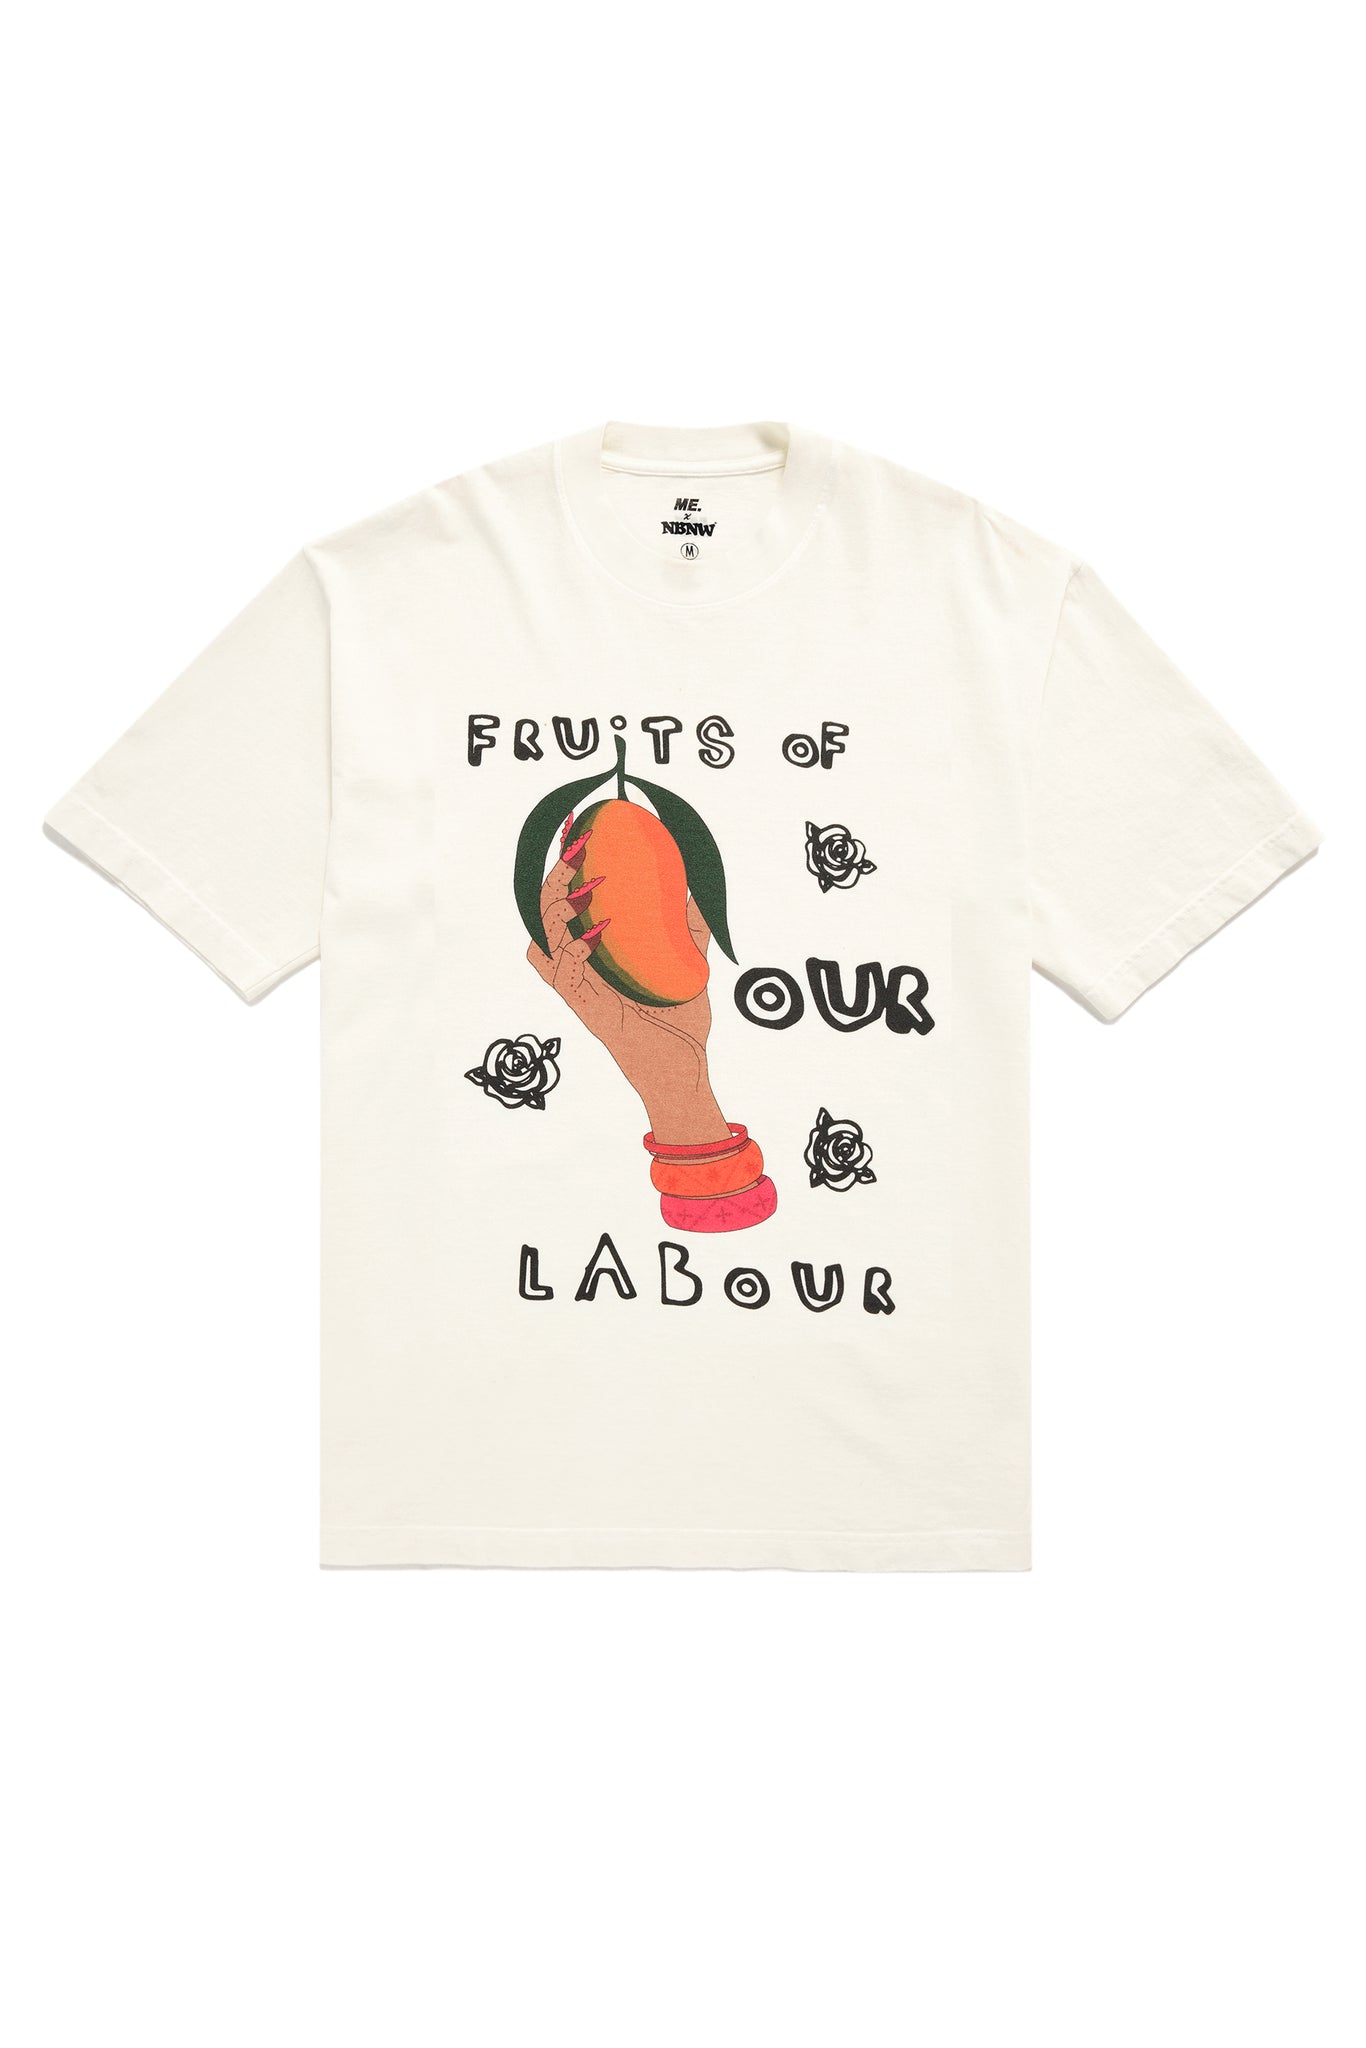 ME. x NBNW Fruits of our Labour Tee